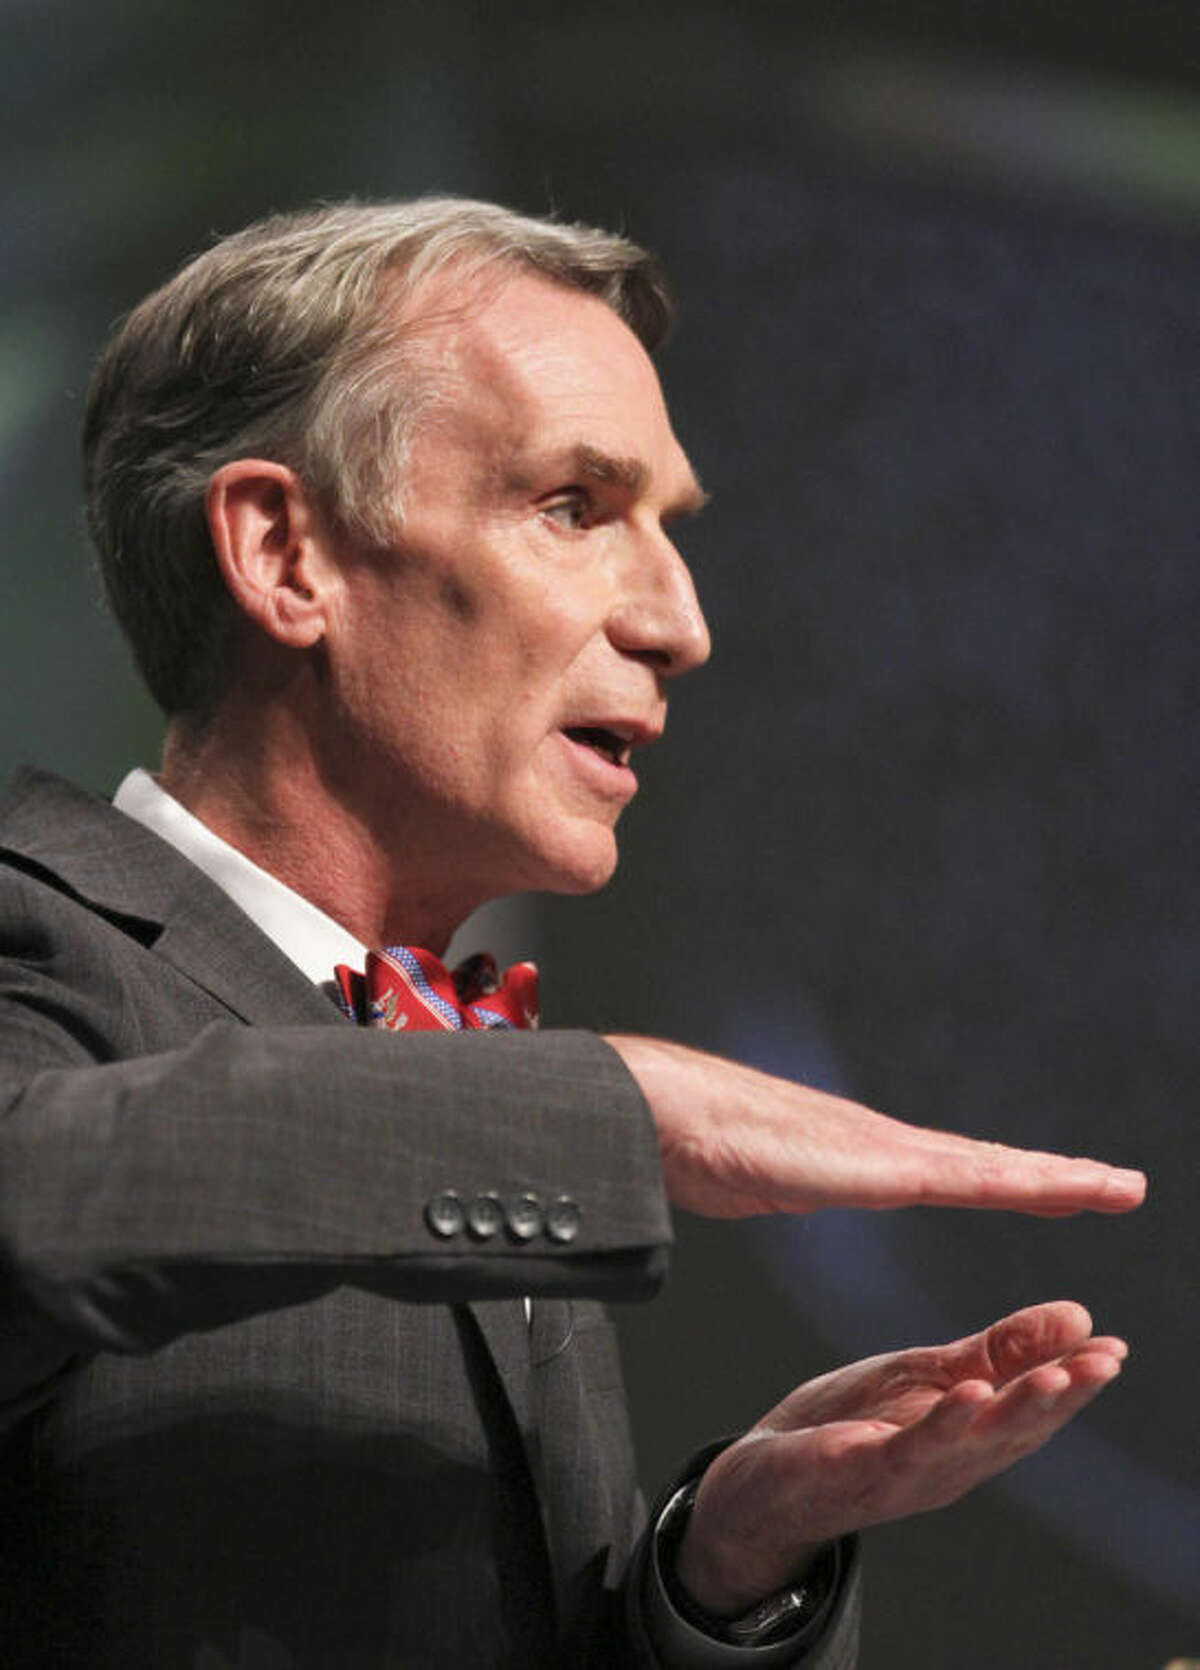 TV's "Science Guy" Bill Nye speaks during a debate on evolution with Creation Museum head Ken Ham, not shown, at the Creation Museum Tuesday, Feb. 4, 2014, in Petersburg, Ky. Ham believes the Earth was created 6,000 years ago by God and is told strictly through the Bible. Nye says he is worried the U.S. will not move forward if creationism is taught to children. (AP Photo/The Courier-Journal, Matt Stone) NO SALES; MAGS OUT; NO ARCHIVE; MANDATORY CREDIT